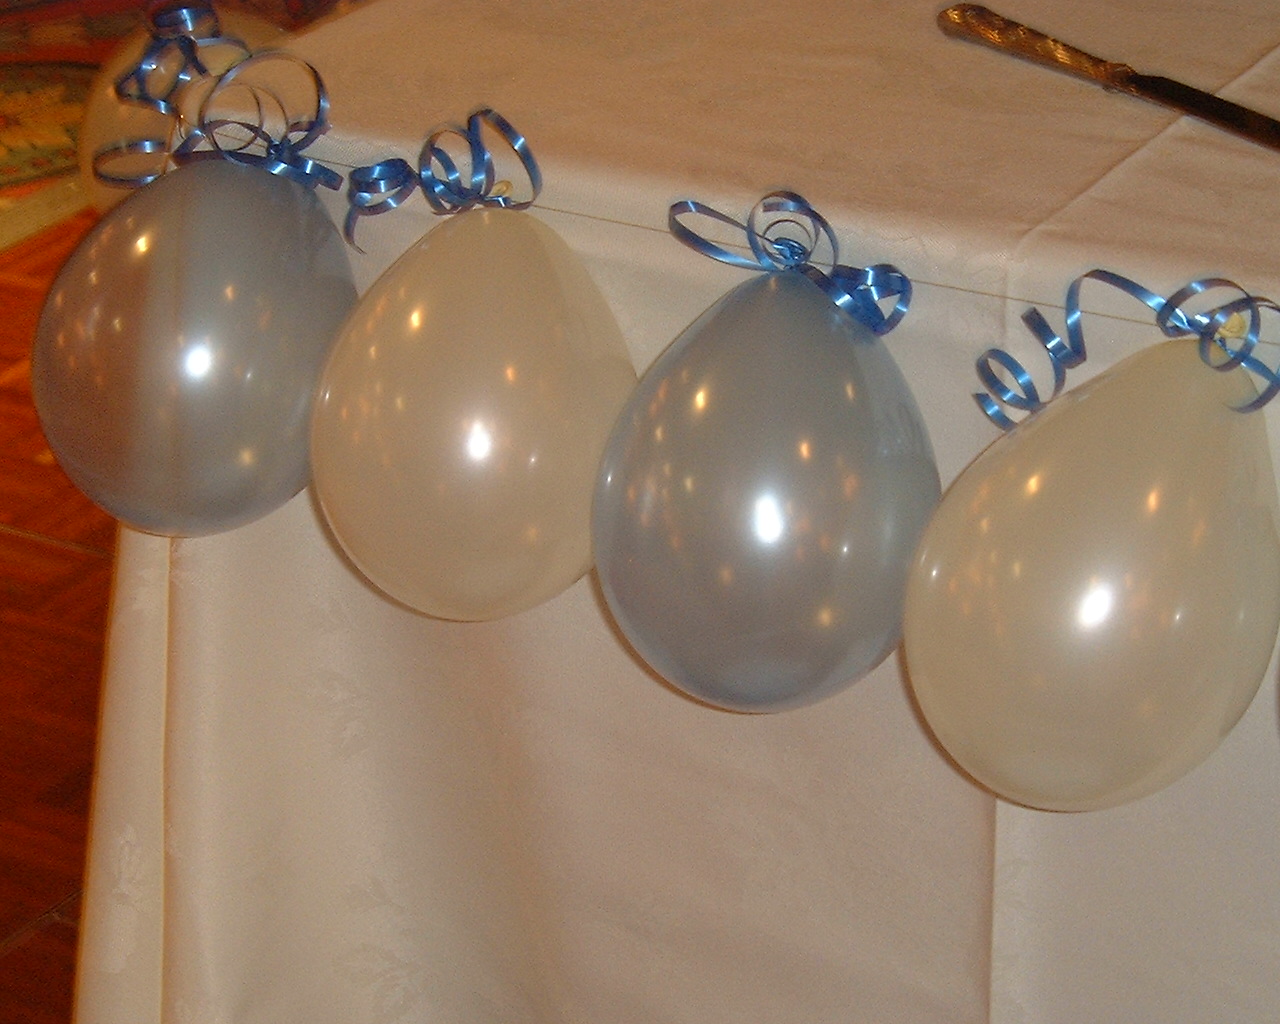 Grosvenor Pulford - Close up azure blue and ivory balloons around the cake table